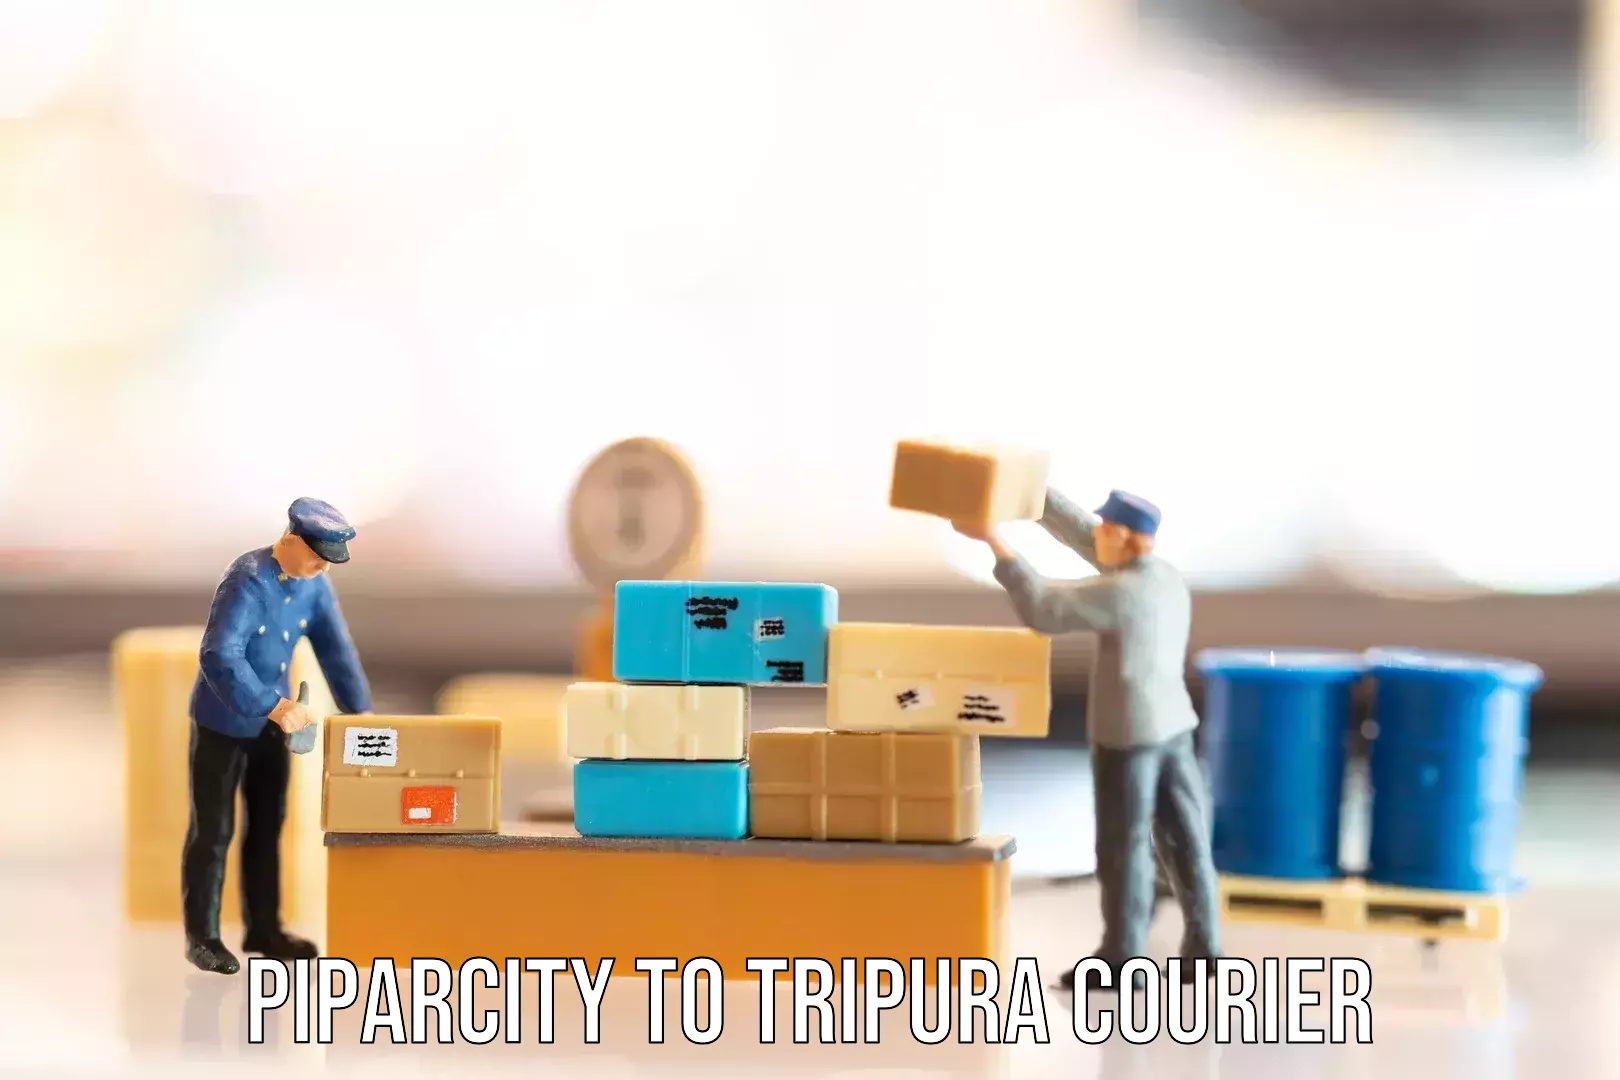 Emergency baggage service Piparcity to Udaipur Tripura